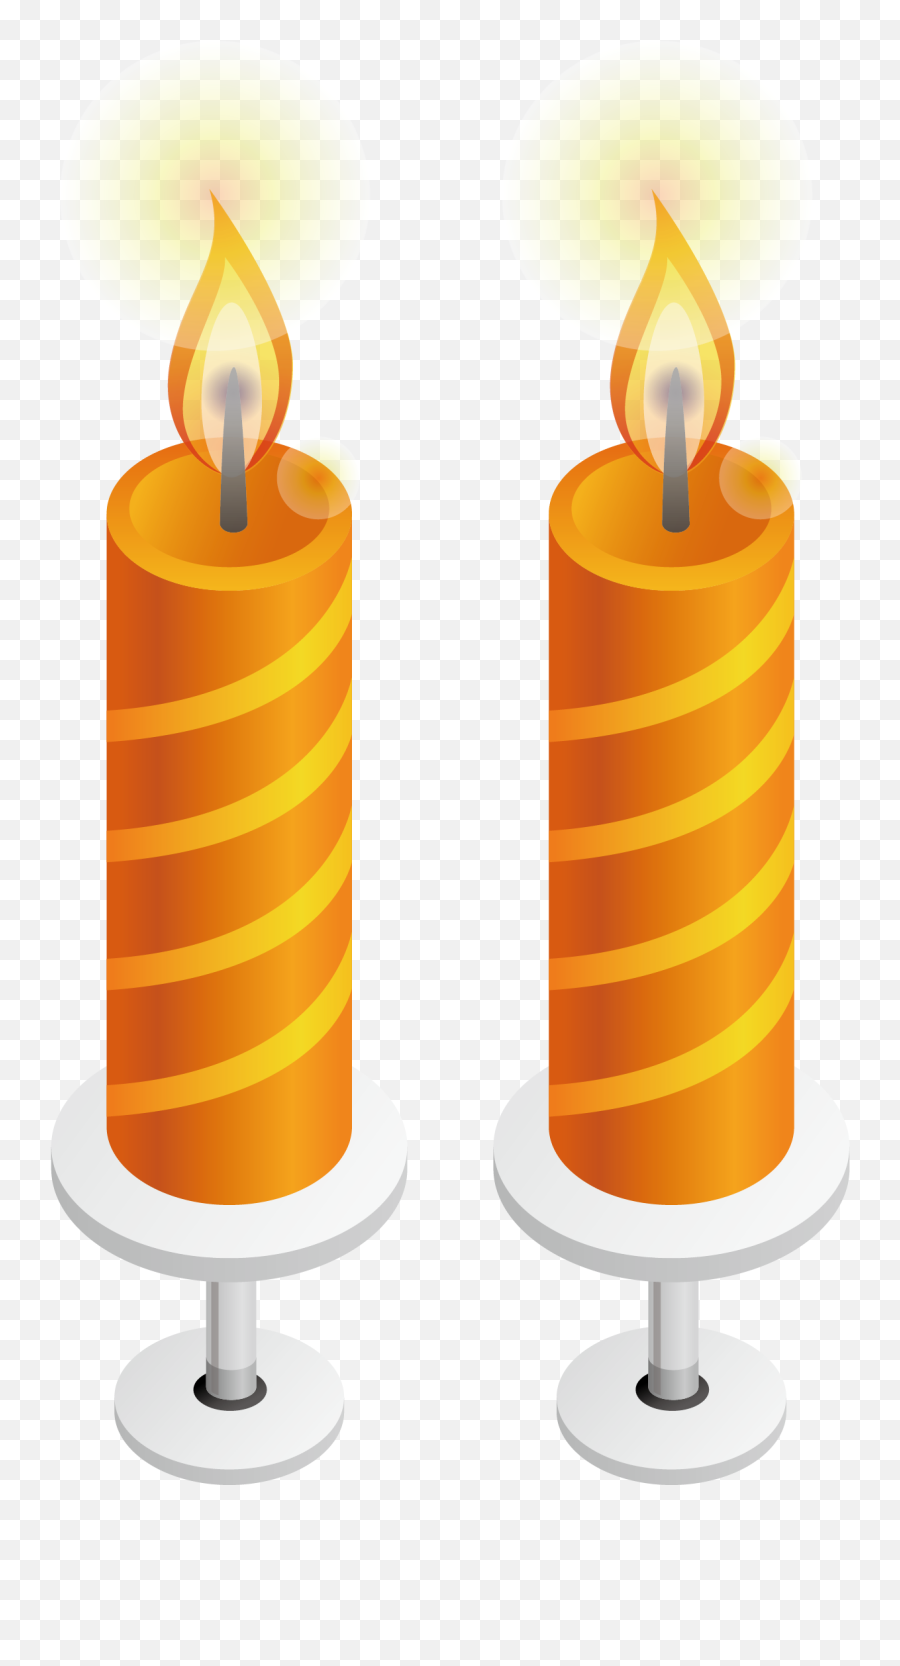 Candle Flame - Candle Png Vector Element Png Download 1207 Christmas,Candle Png